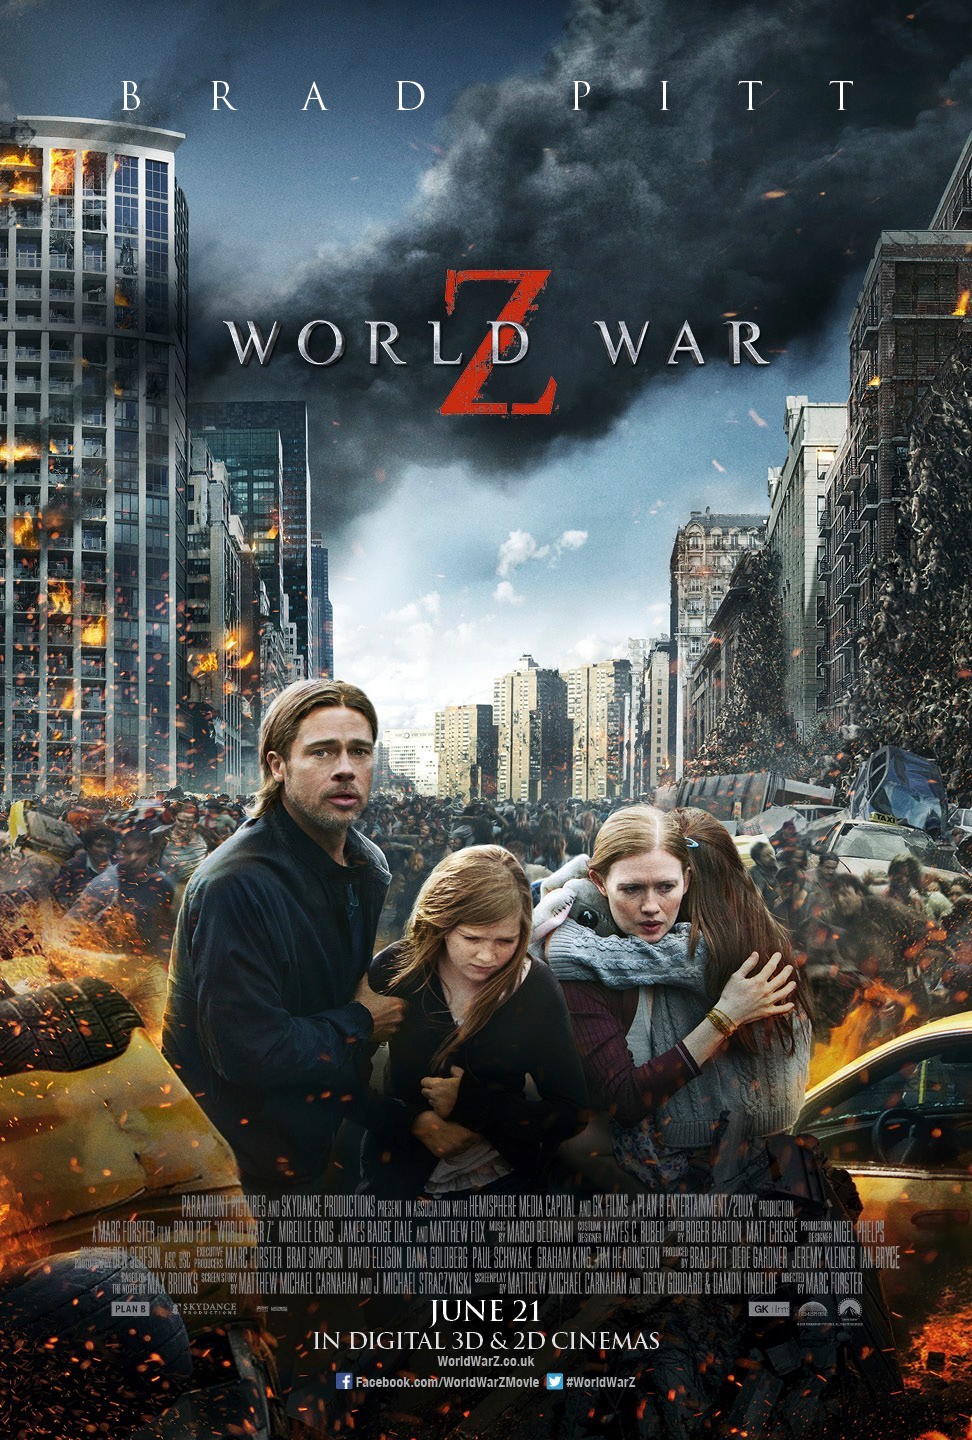 Brad Pitt, Abigail Hargrove and Mireille Enos in Paramount Pictures' World War Z (2013)